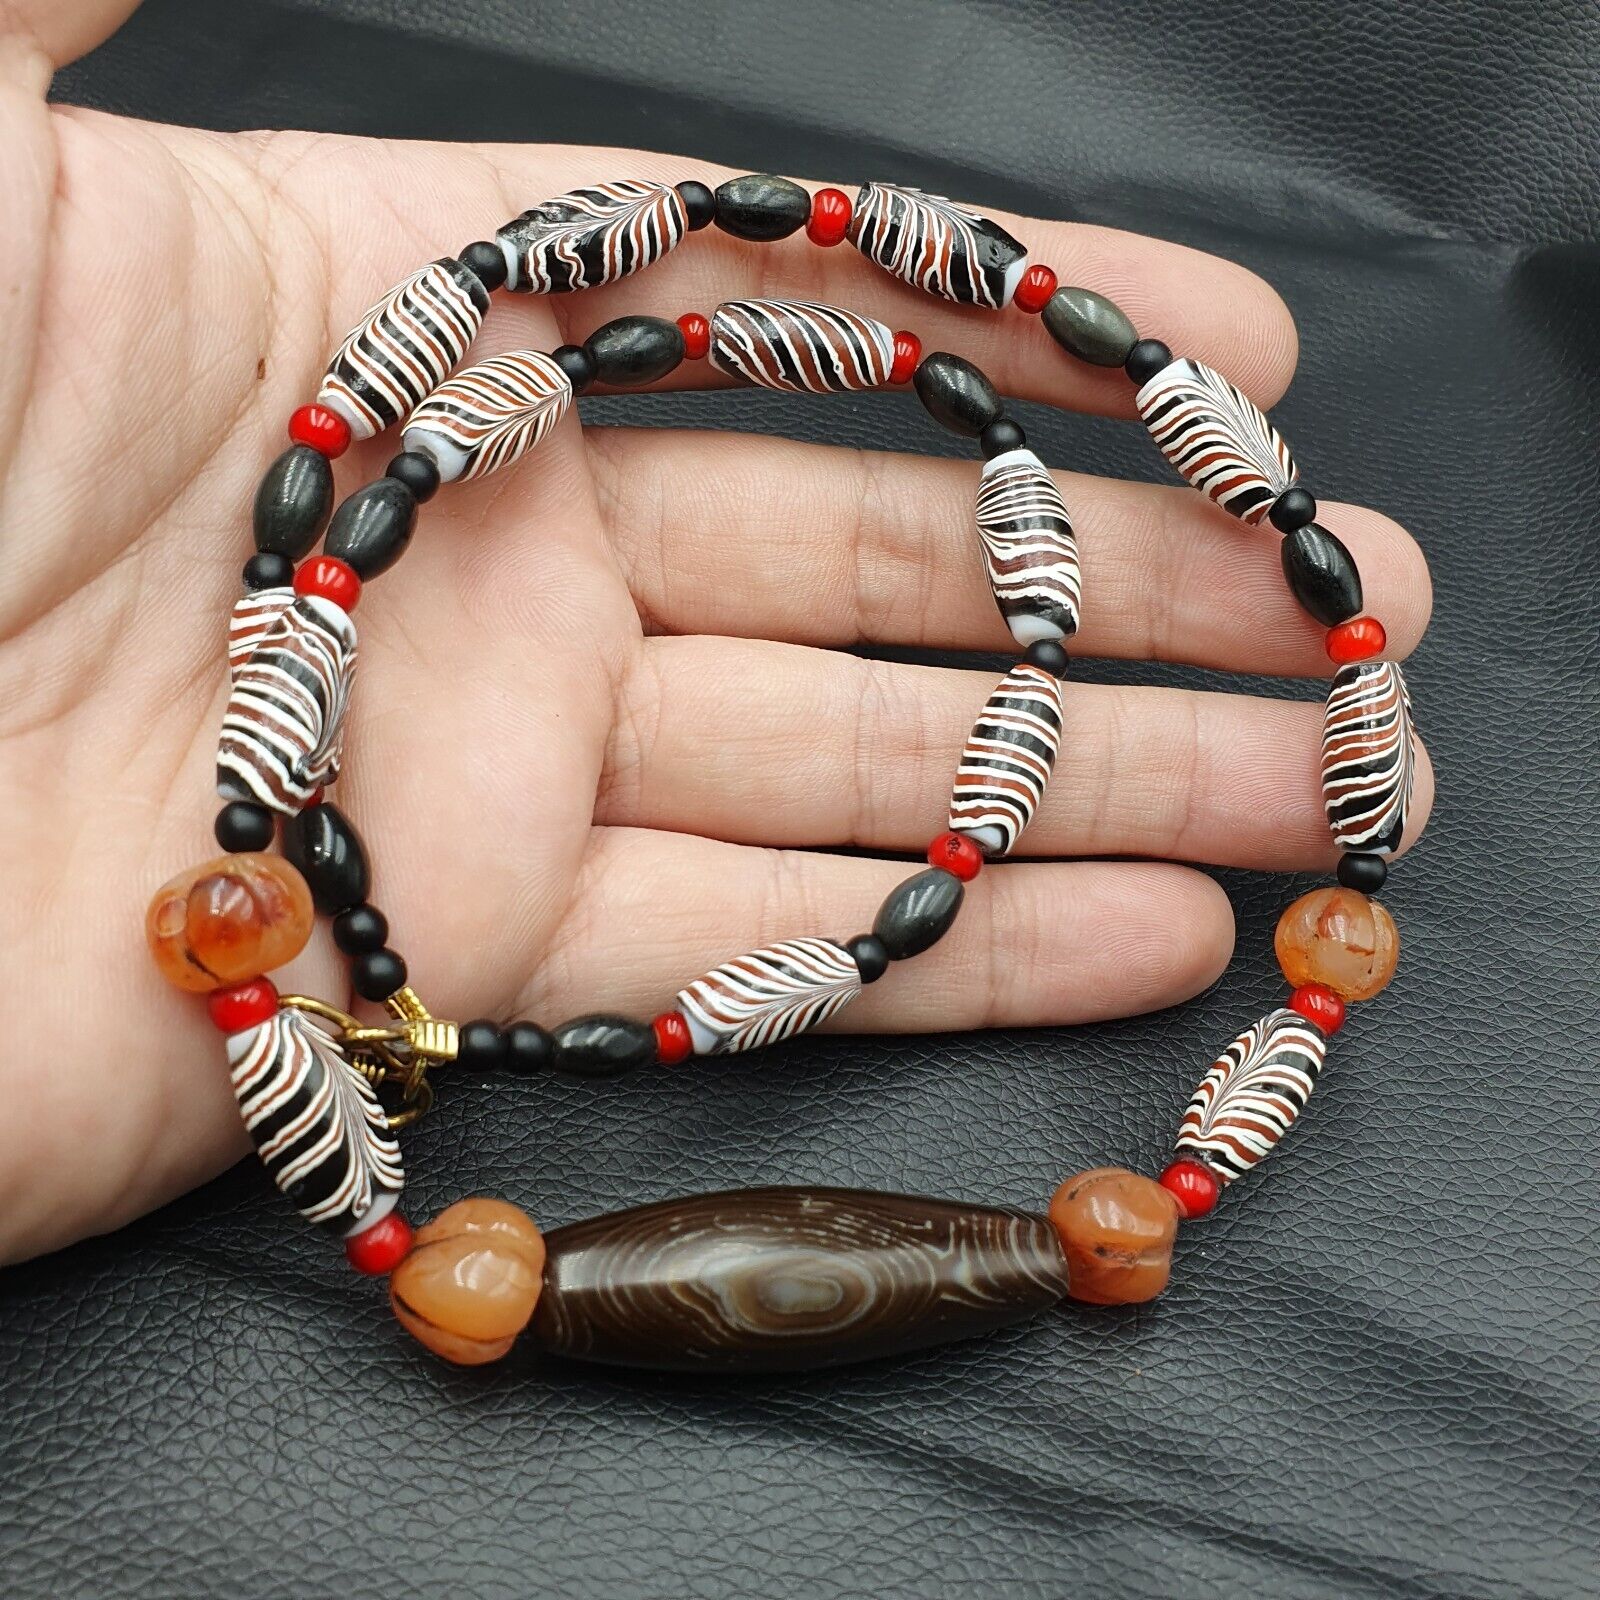 Indo Tibetan Himalayan Agate and Glass beads necklace YMN3